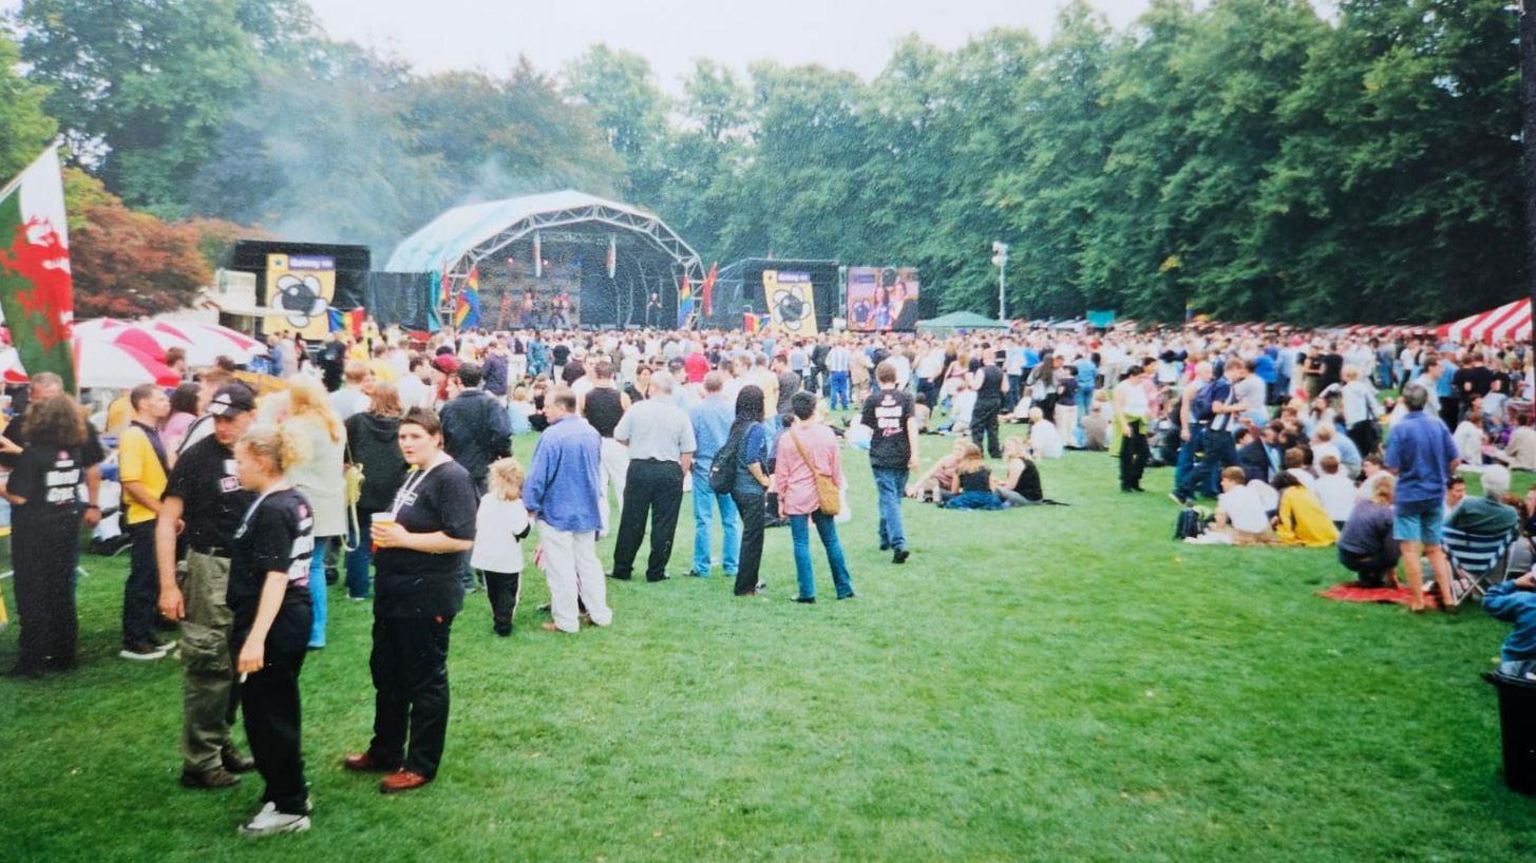 People gathered in the park with a stage at the back of the photo